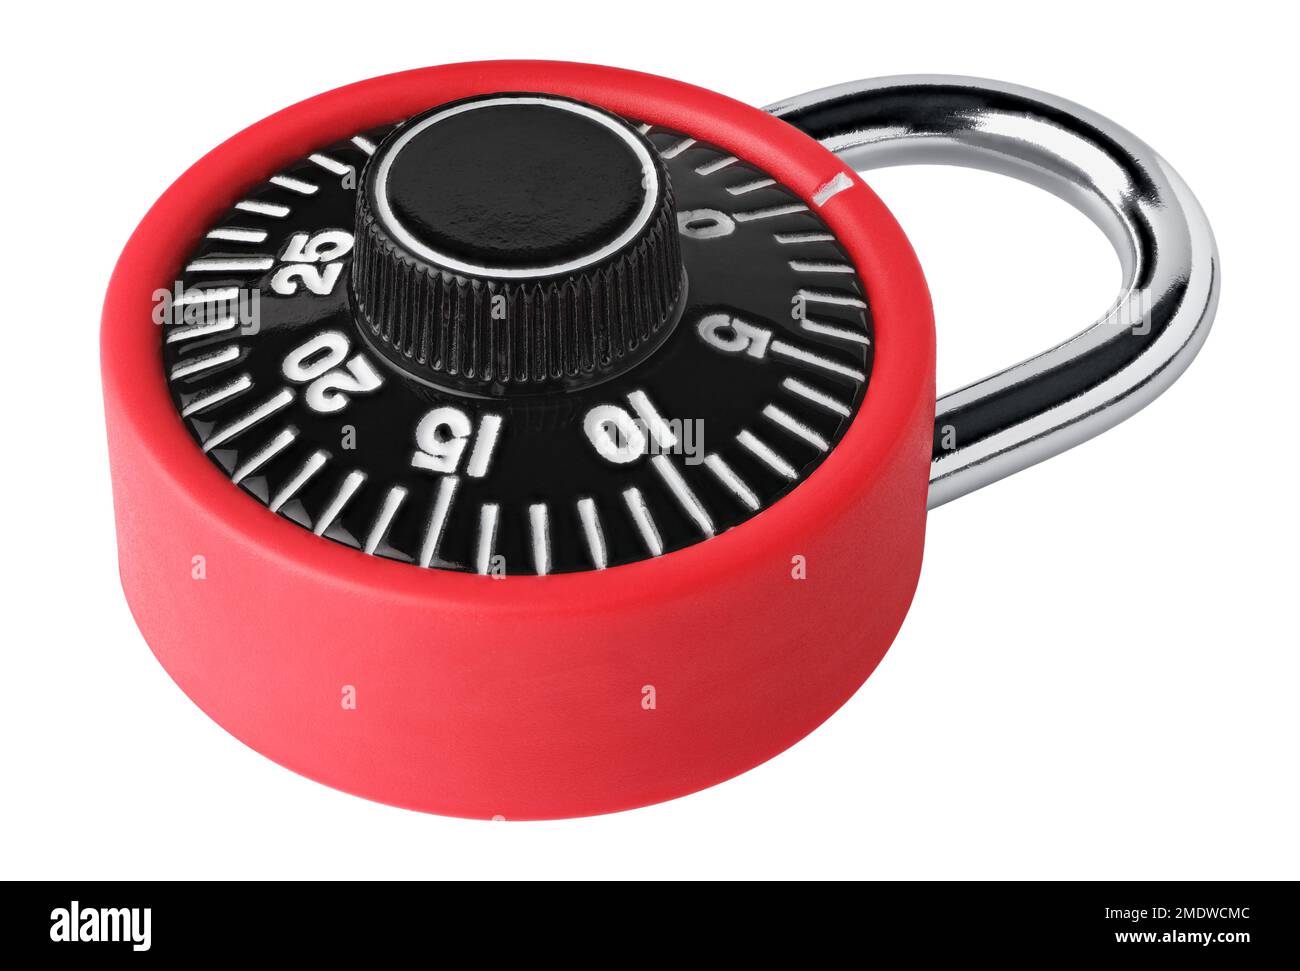 Little red combination padlock, isolated on white background Stock Photo